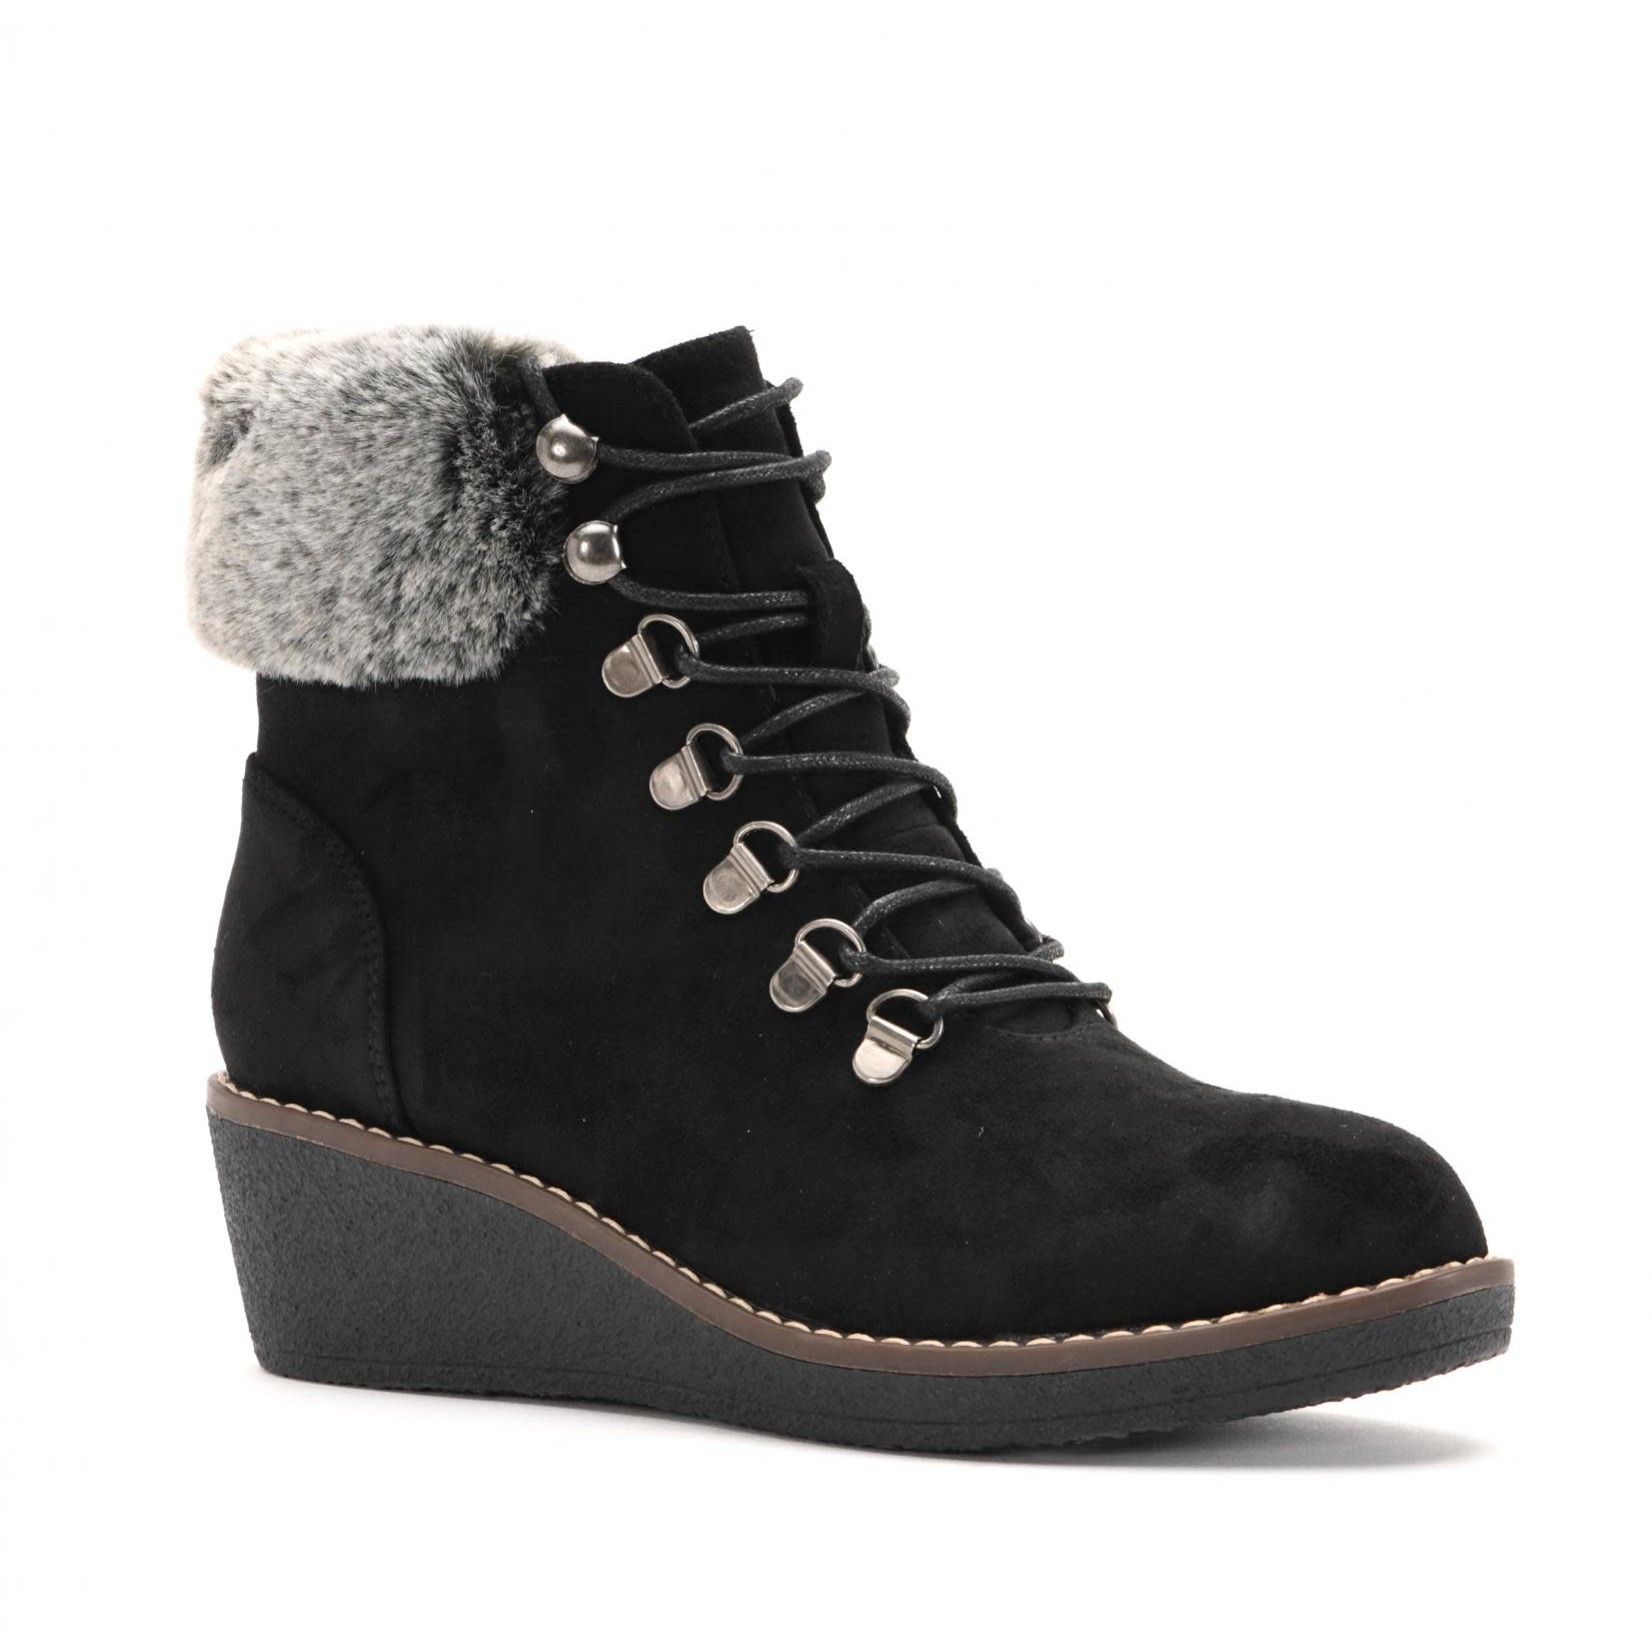 Corkys Fox Bay Lace Up Wedge Bootie